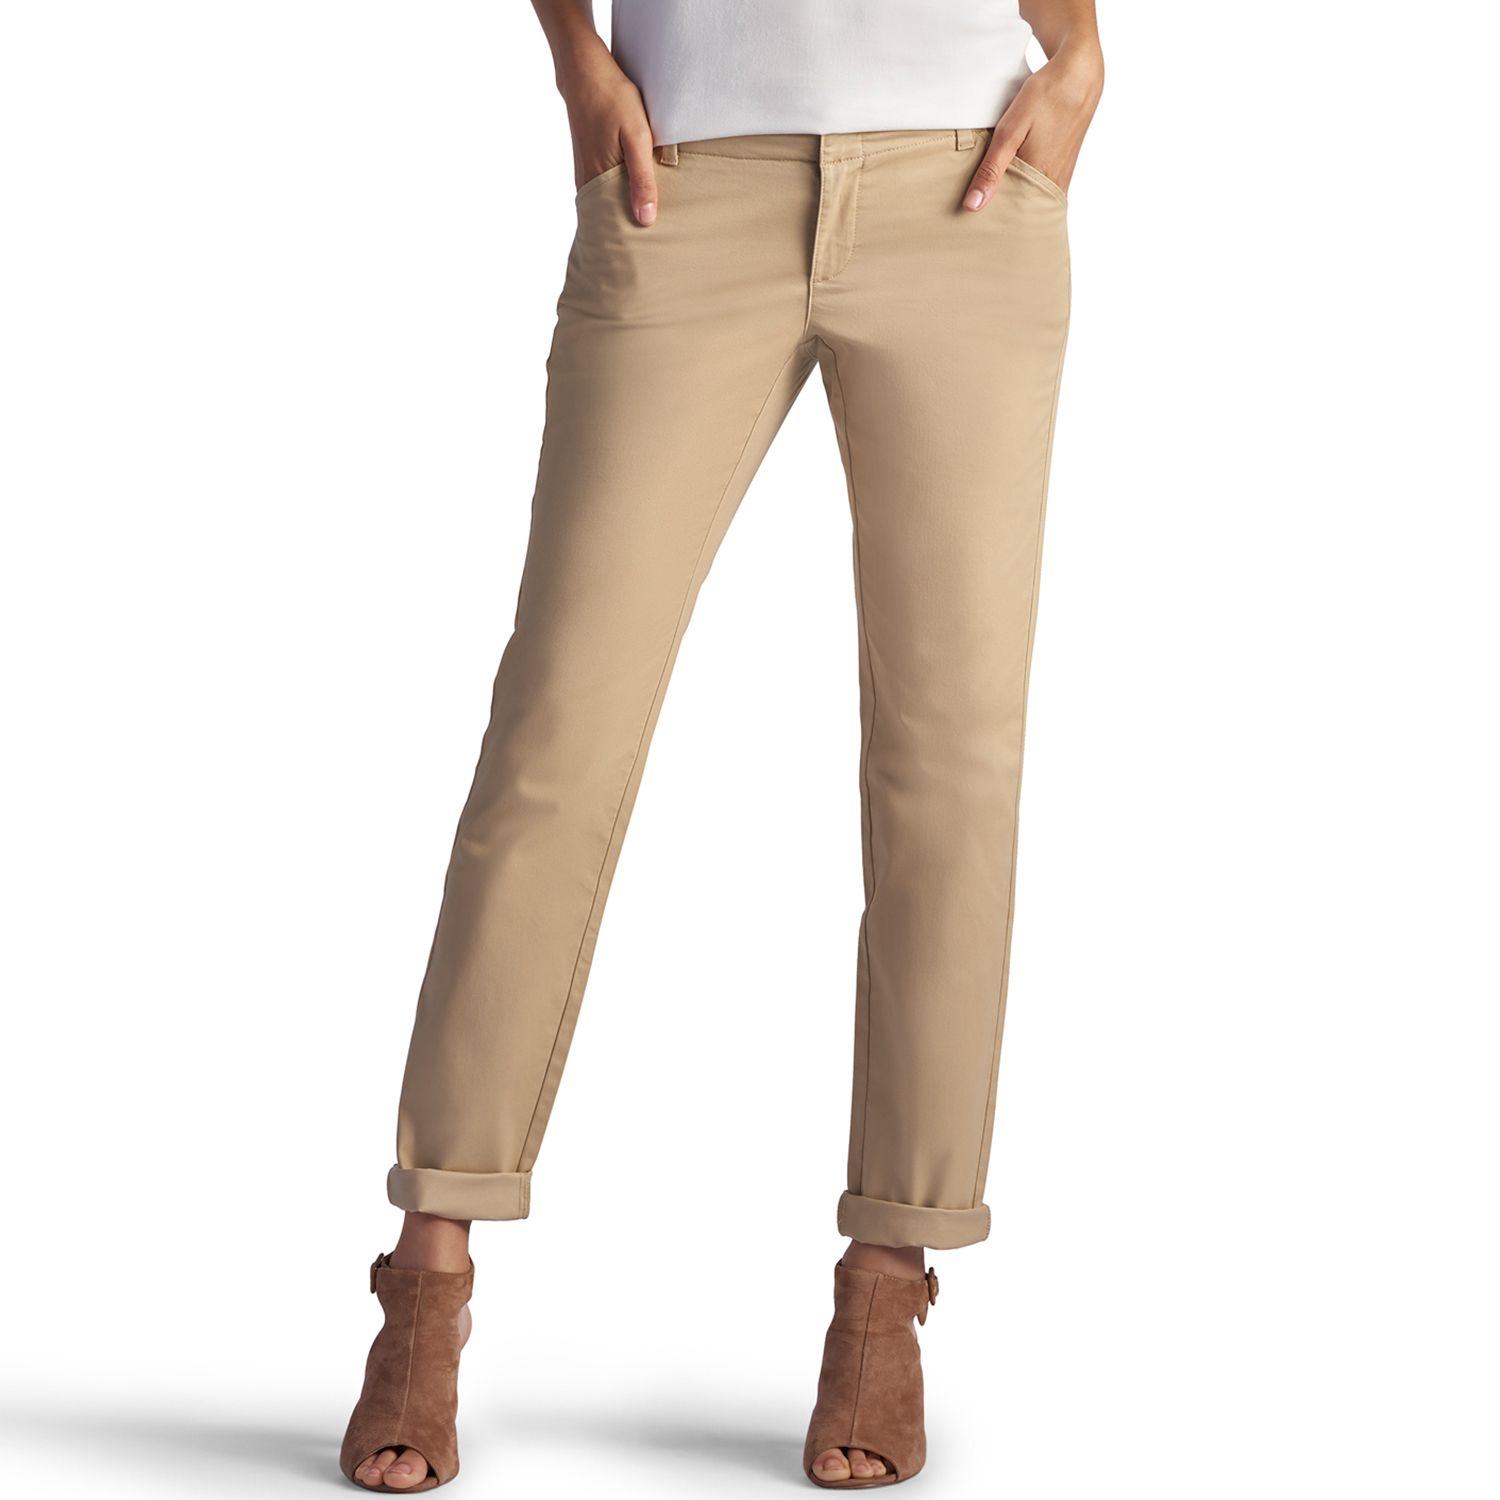 lee women's midrise fit essential chino pant